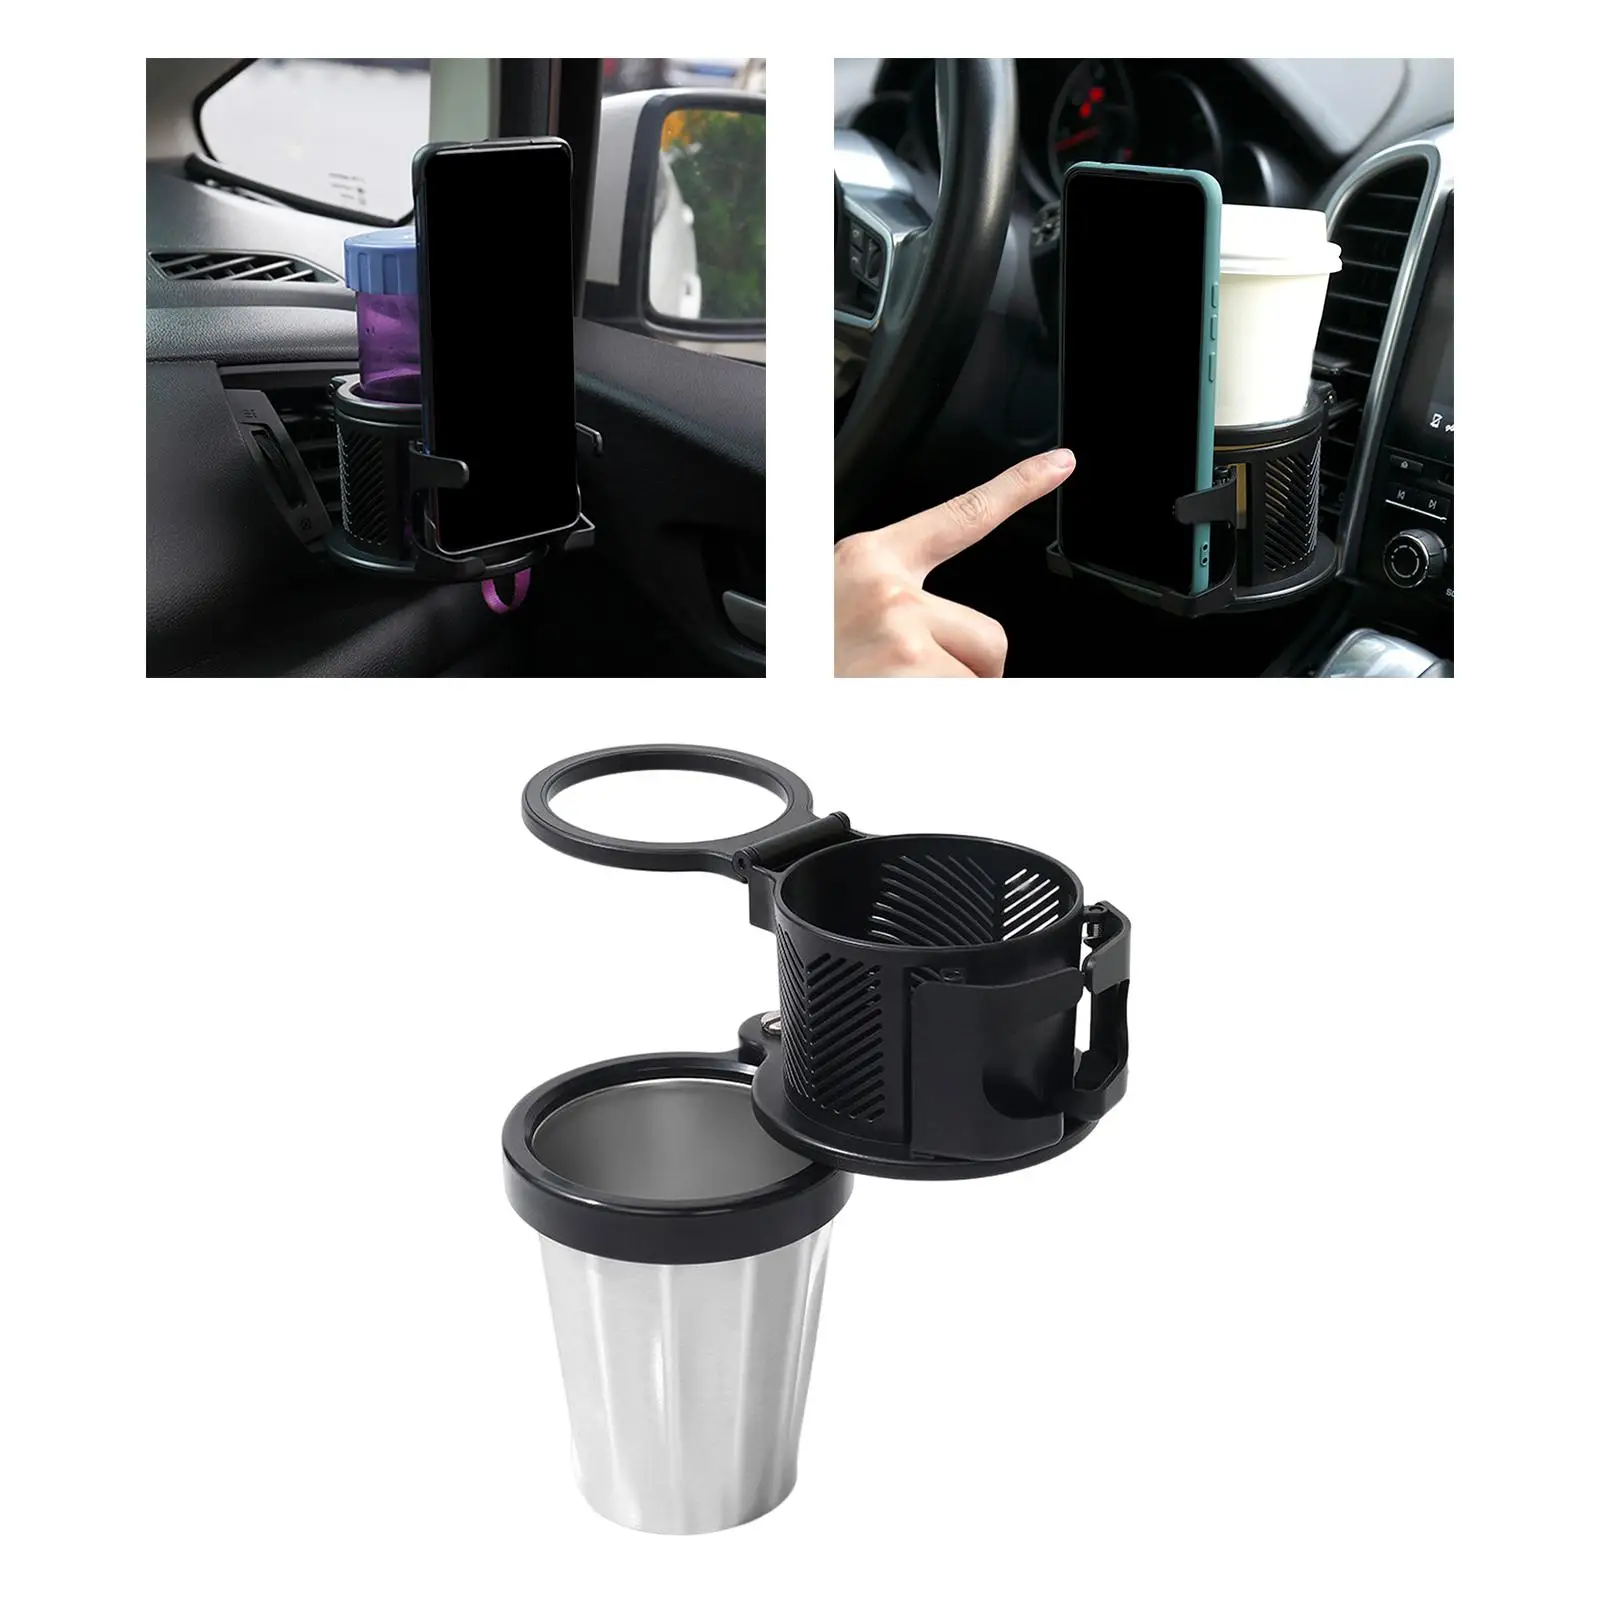 Cup Holder Rotating Base Stand Rack Tray Car Headrest Seat Back Organizer Car Cup Holder Expander Car